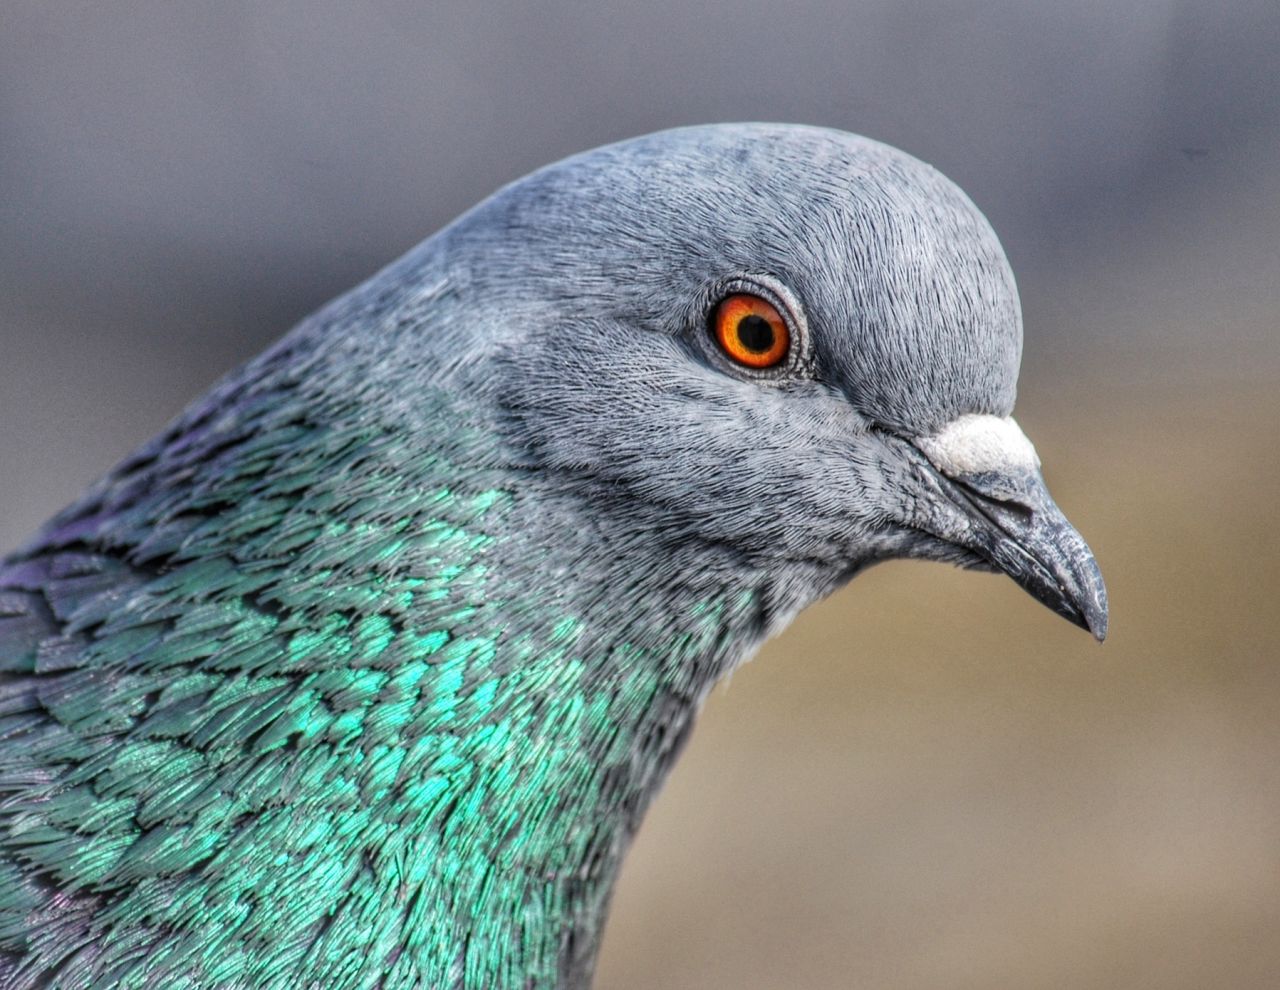 Looking inside a pigeon’s ear using quantum technology thumbnail image